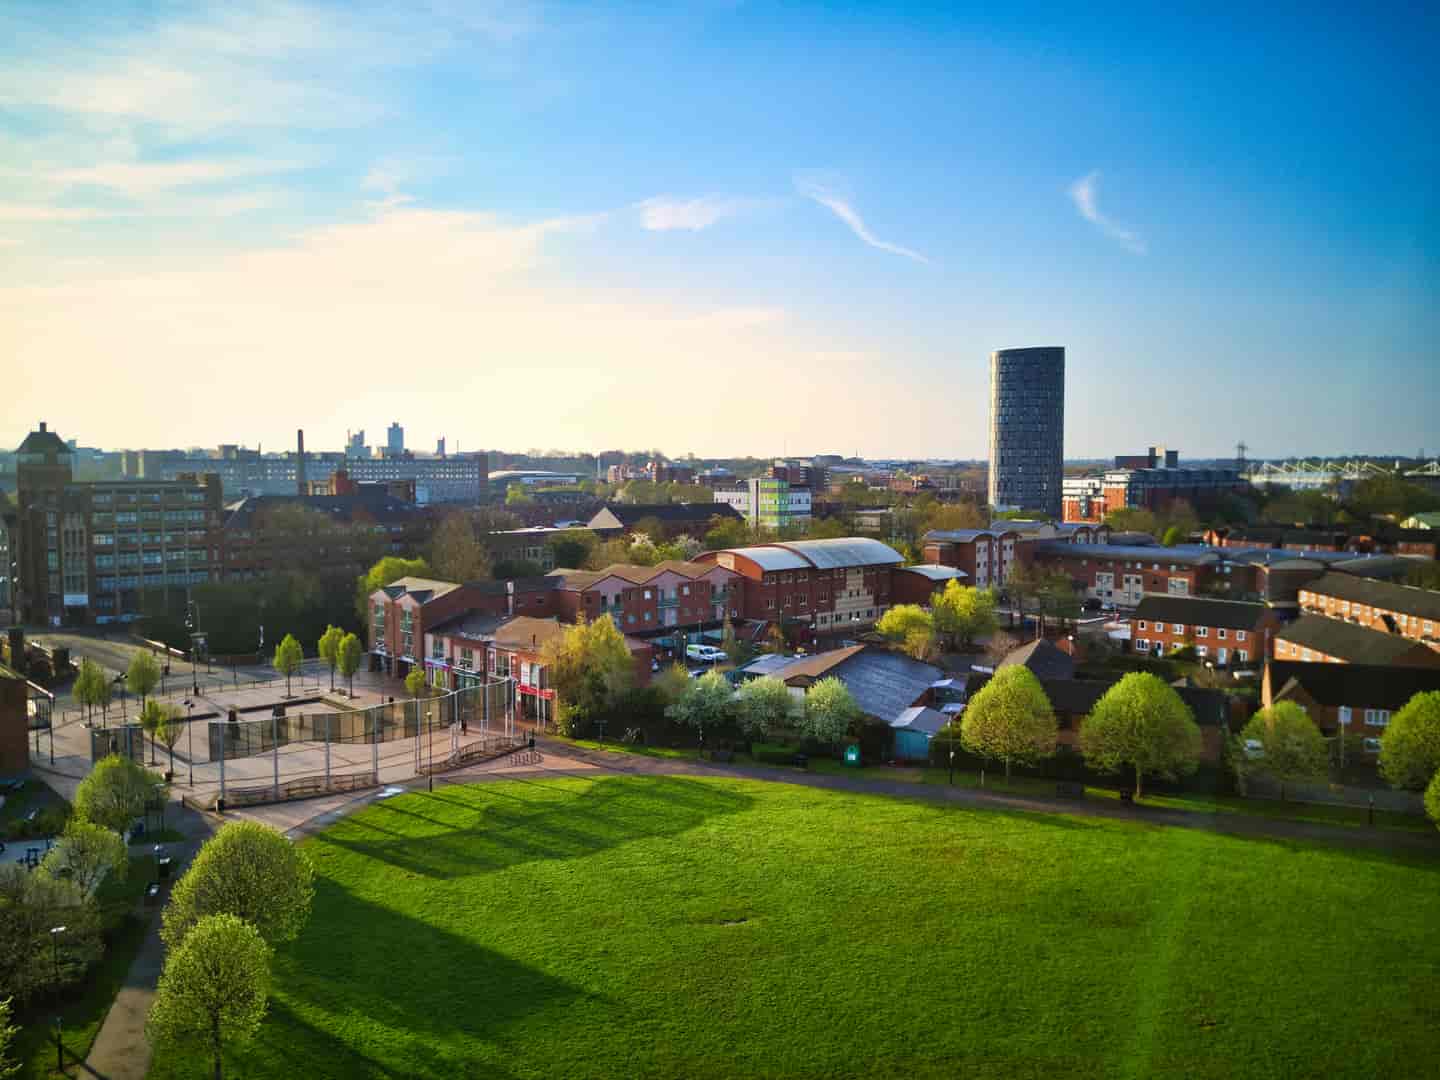 Student Accommodation in Leicester - Leicester skyline and Bede Park